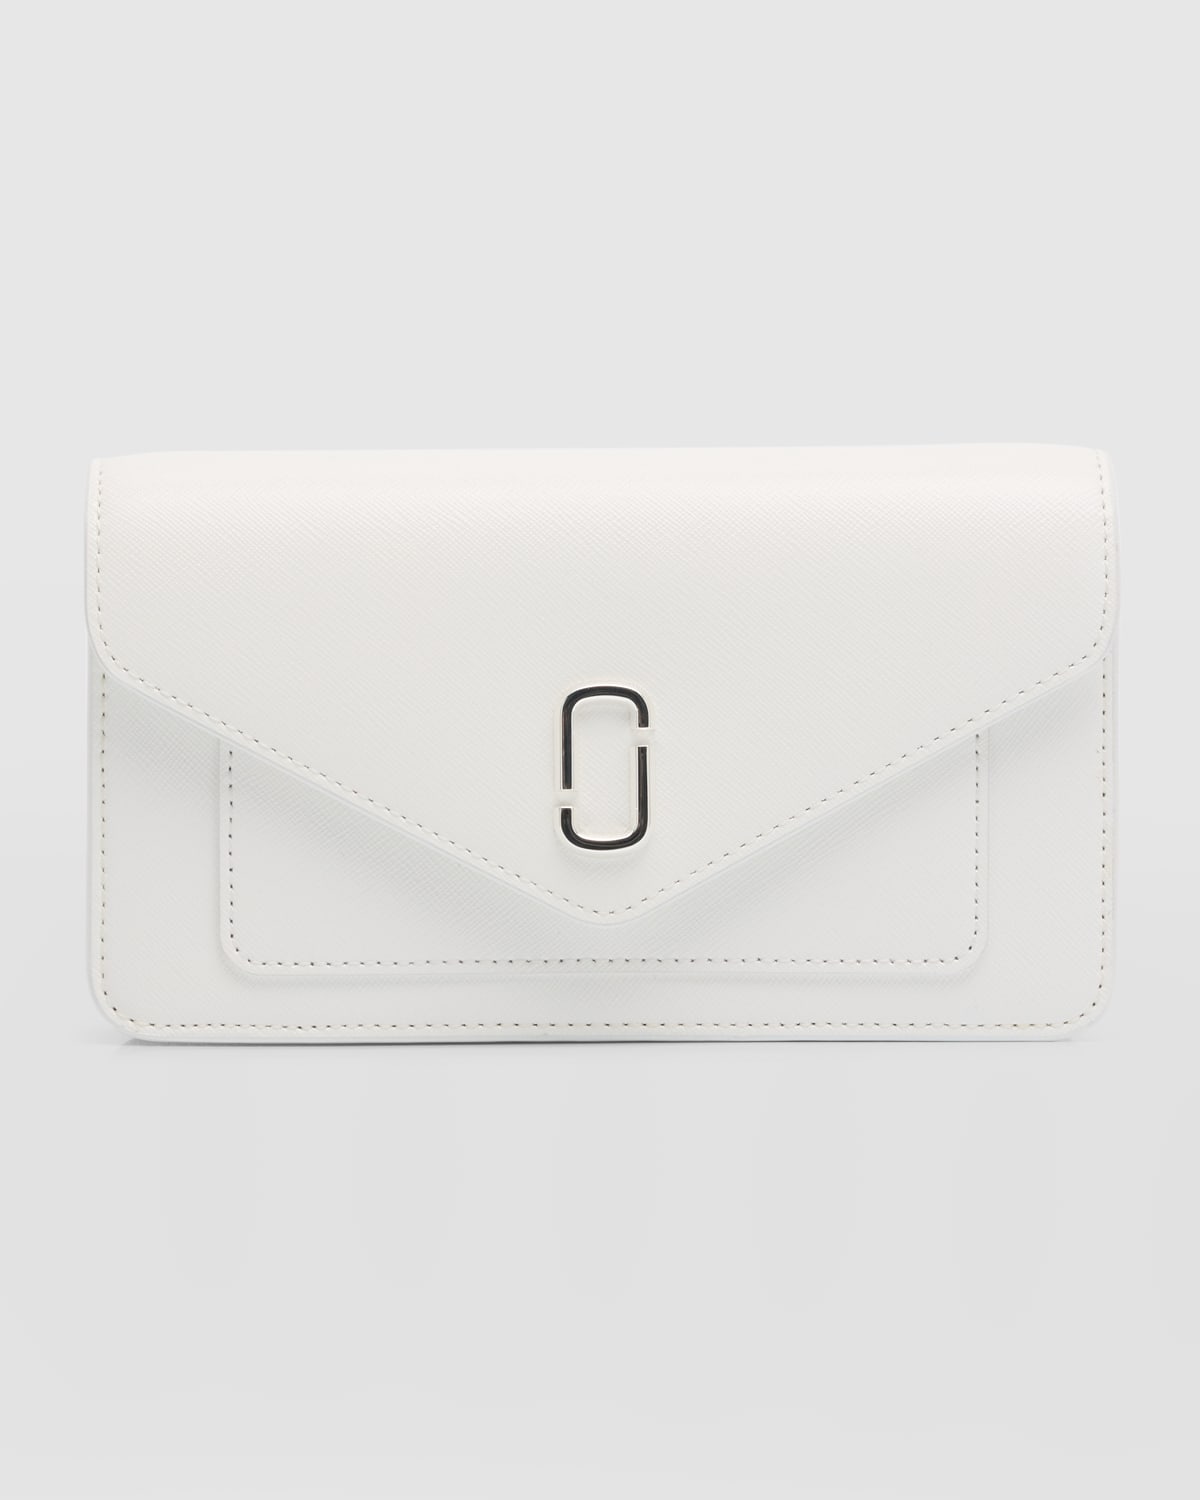 Marc Jacobs Snapshot Bag White - $250 (28% Off Retail) - From